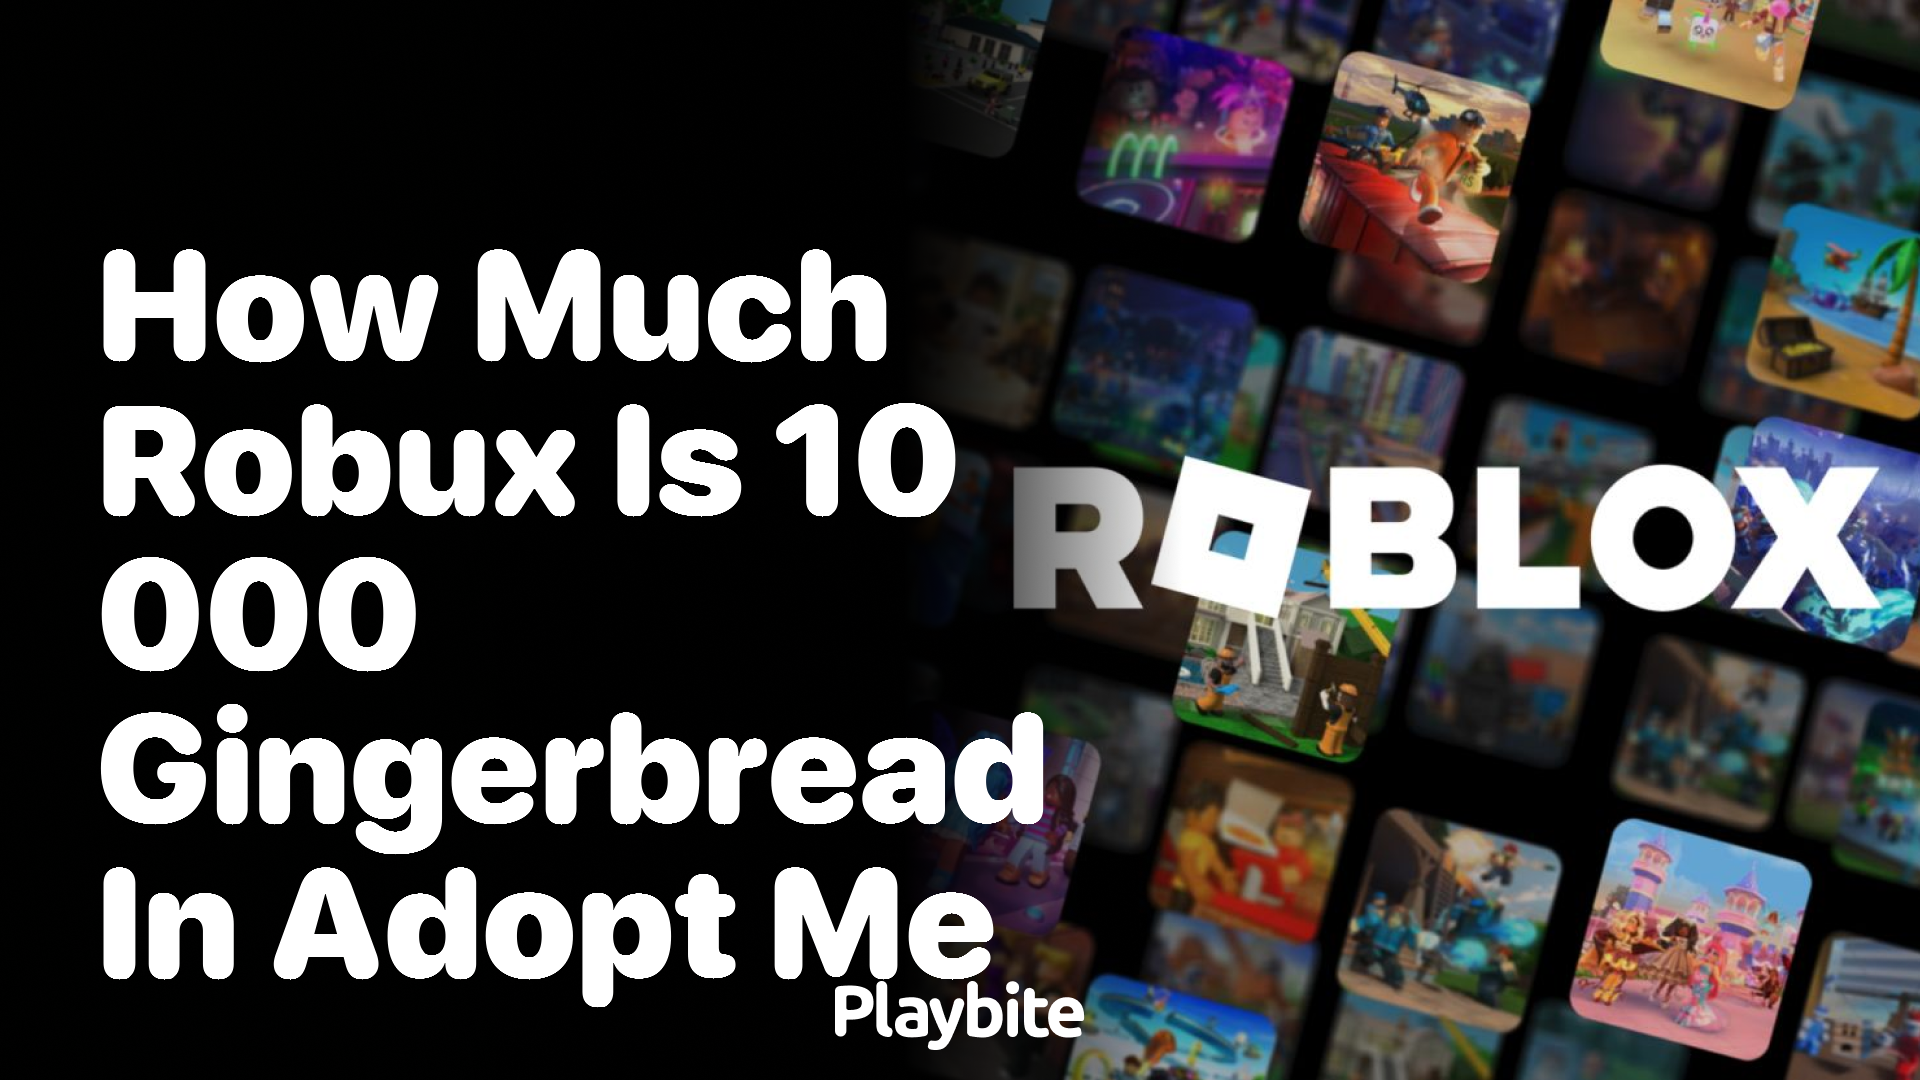 How Much Robux is 10,000 Gingerbread in Adopt Me?